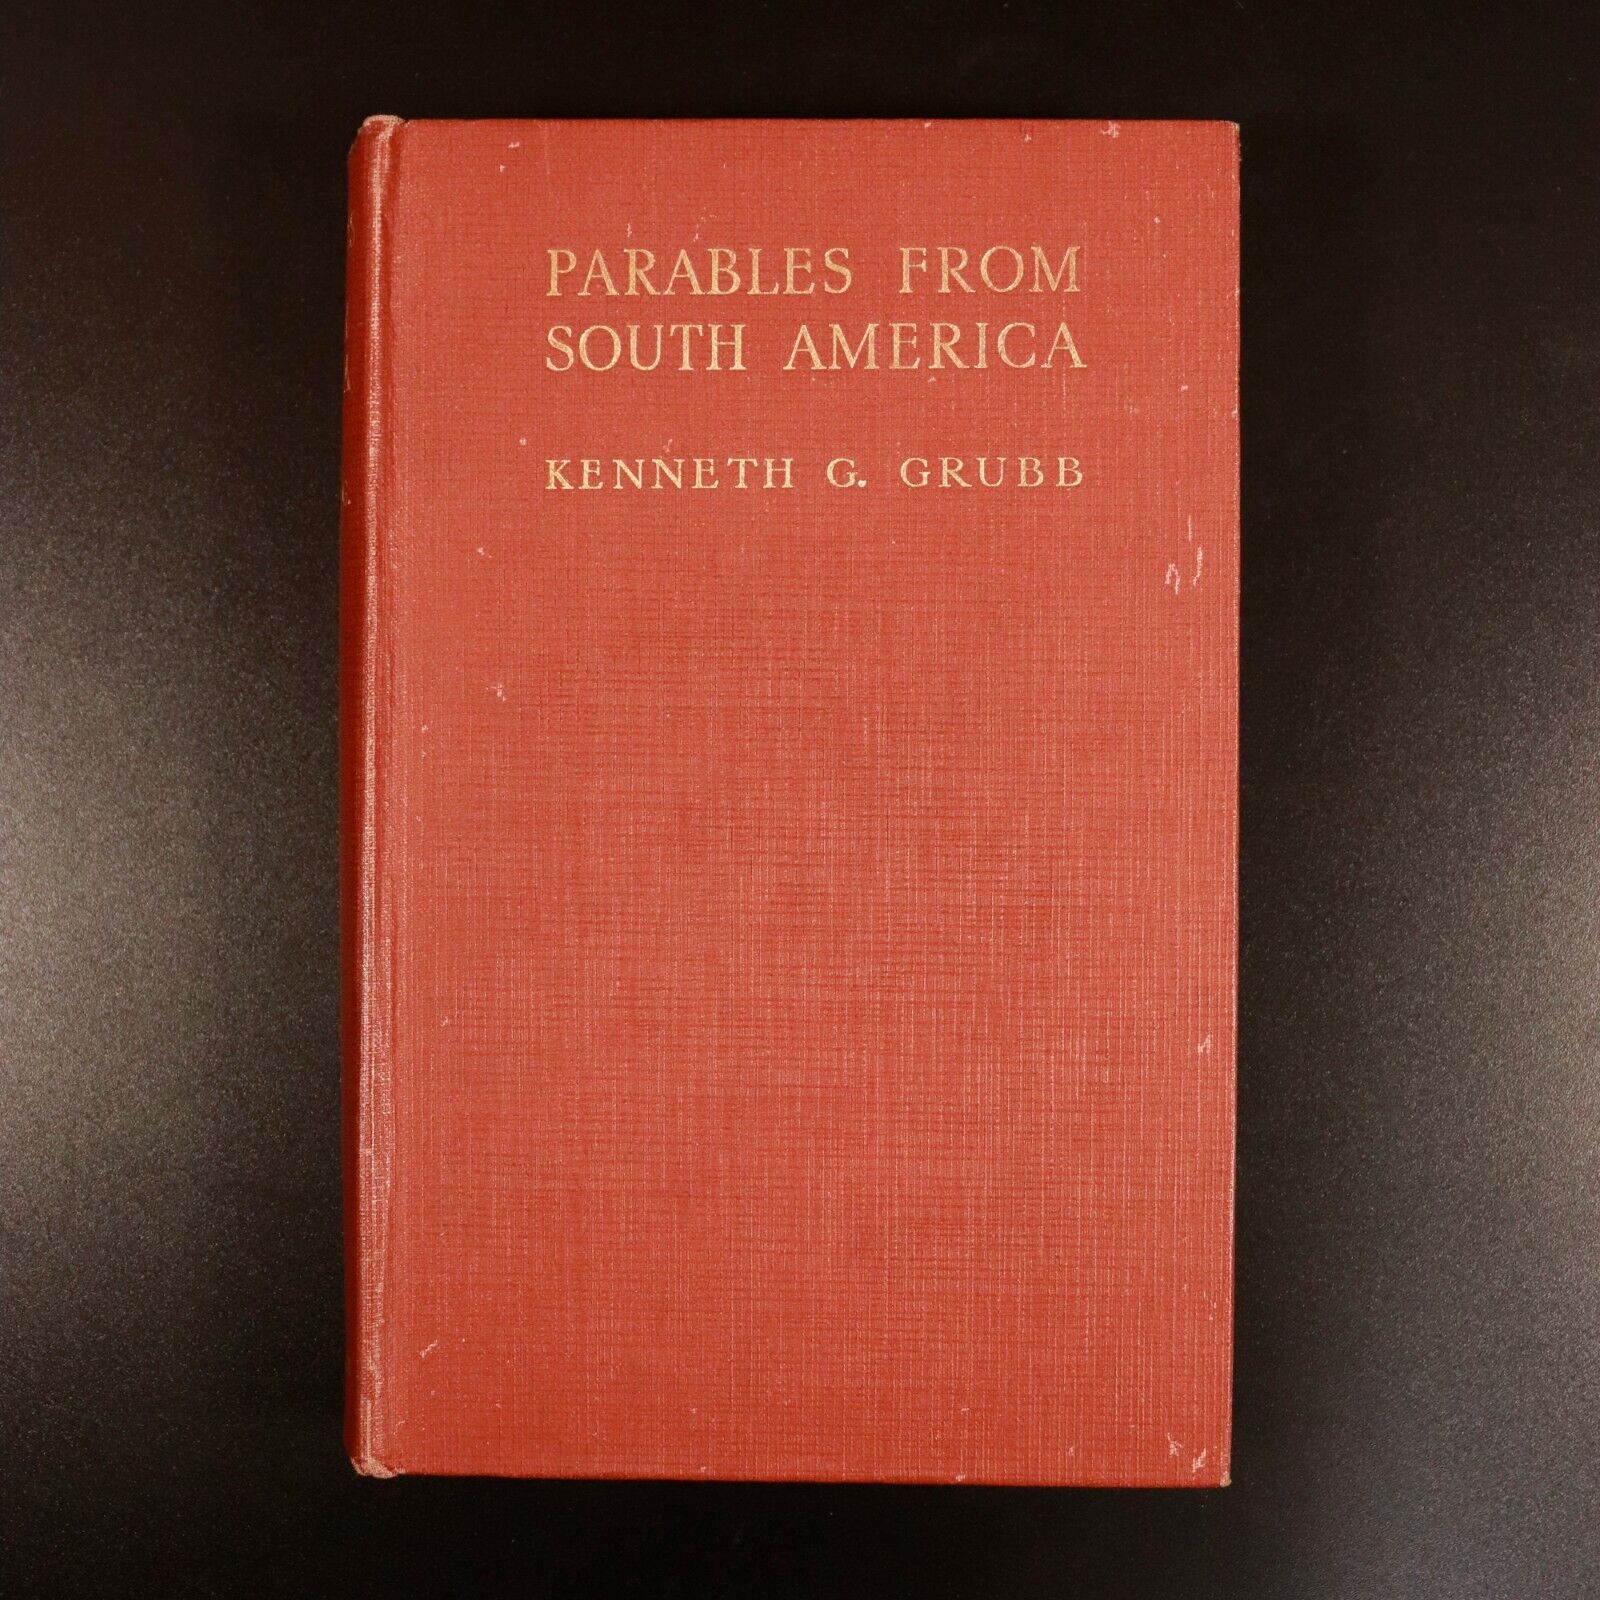 1932 Parables From South America by K.G. Grubb History Book 1st Edition